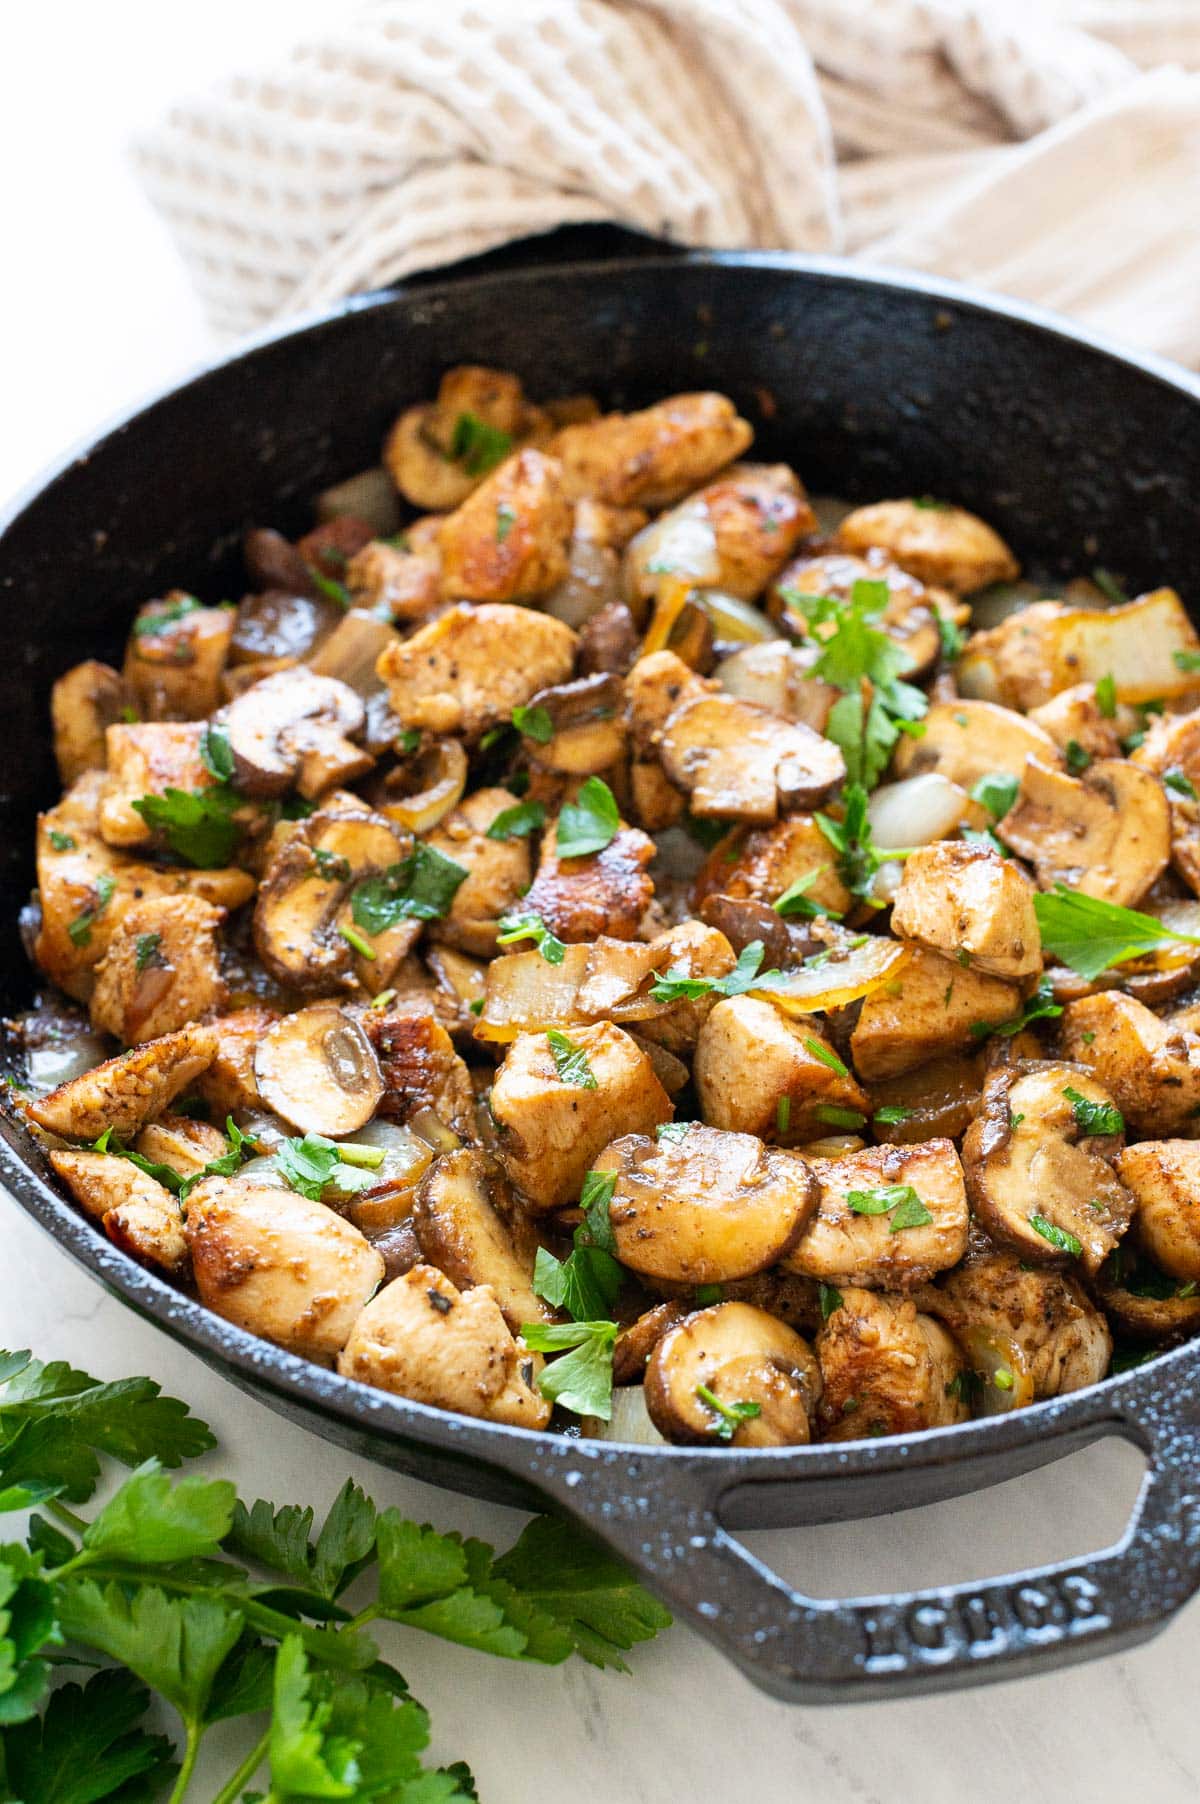 Sauteed chicken and mushrooms in cast iron skillet garnished with parsley.